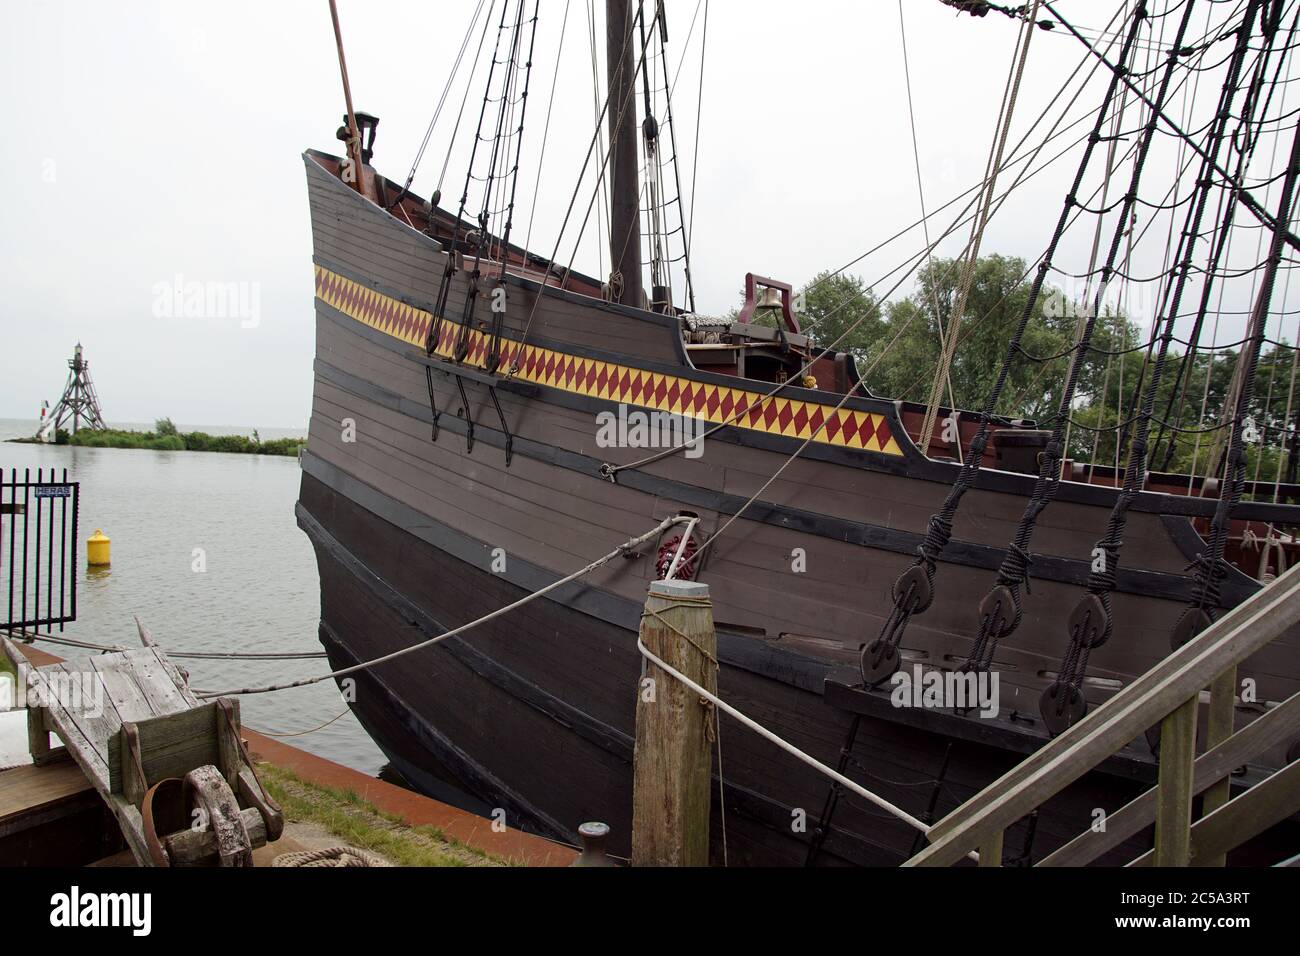 Second replica of Halve Maen. Boat (similar to a carrack) of the Dutch V.O.C. sailed to New York in 1609. Captain Henry Hudson. Hoorn, Netherlands Stock Photo